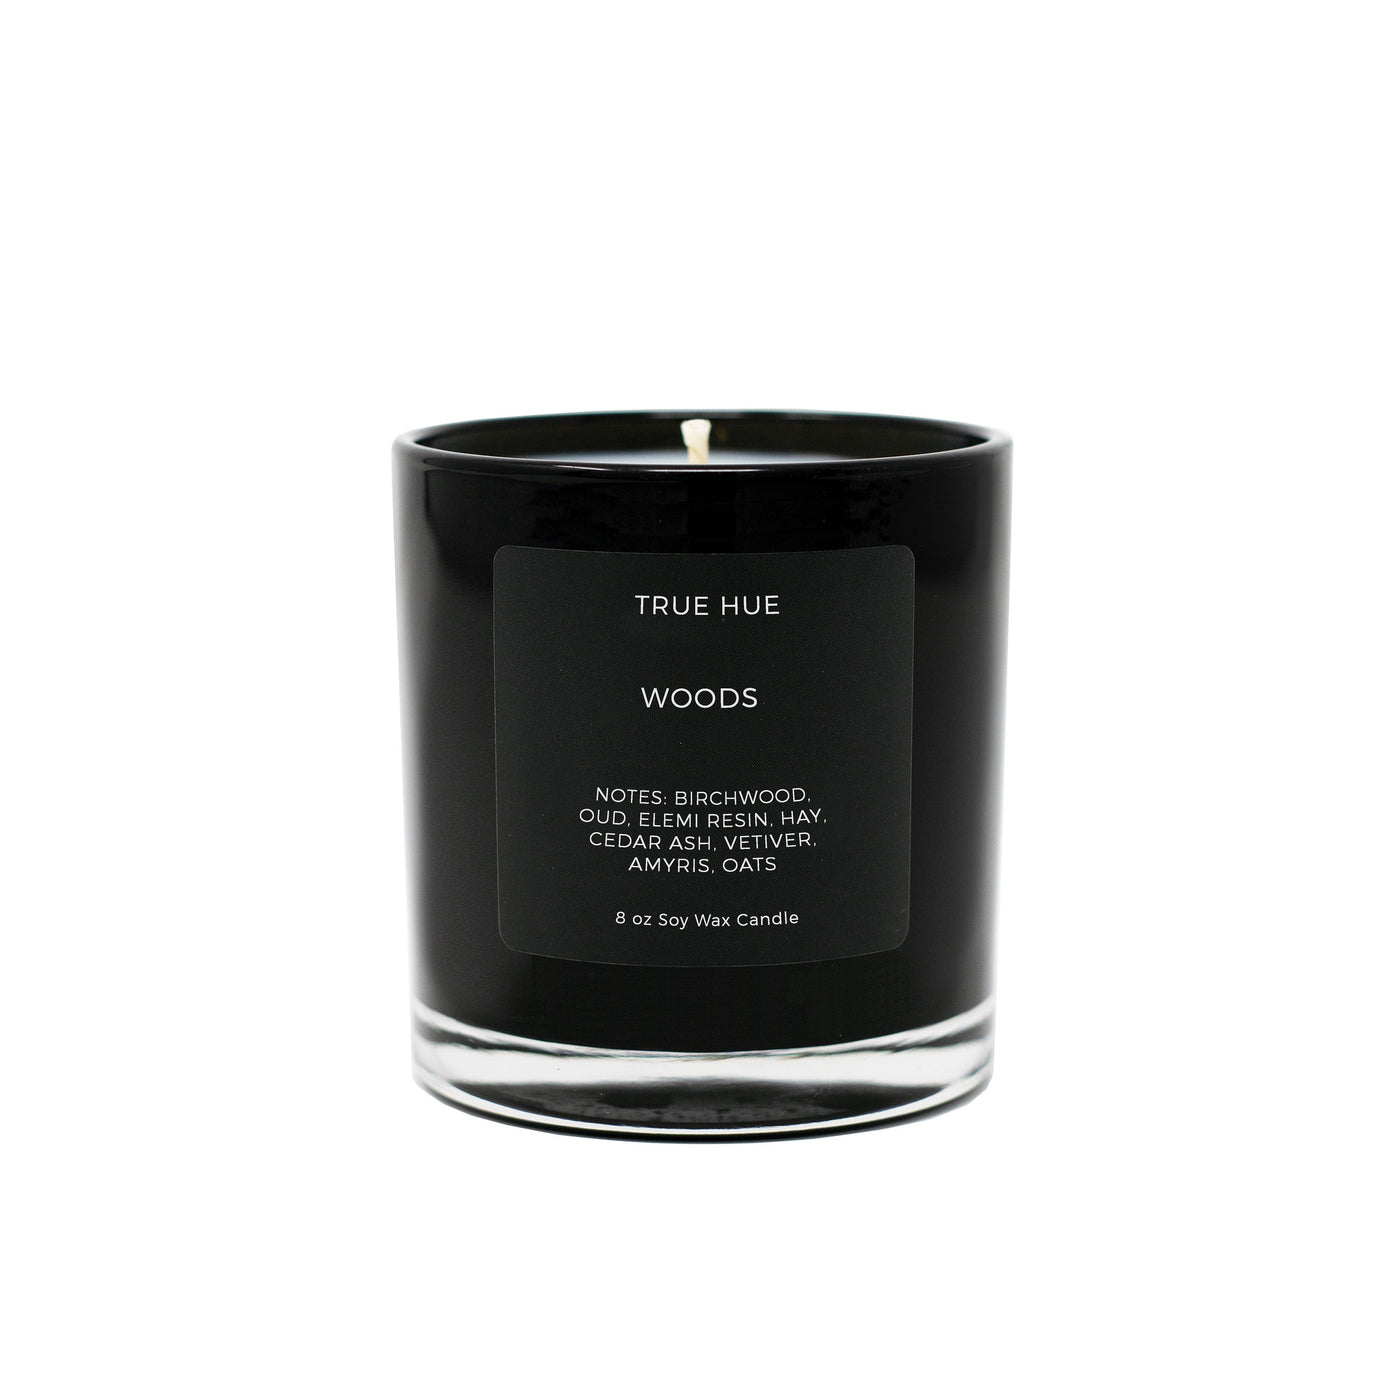 Woods Soy Wax Candle - The Lake and Company